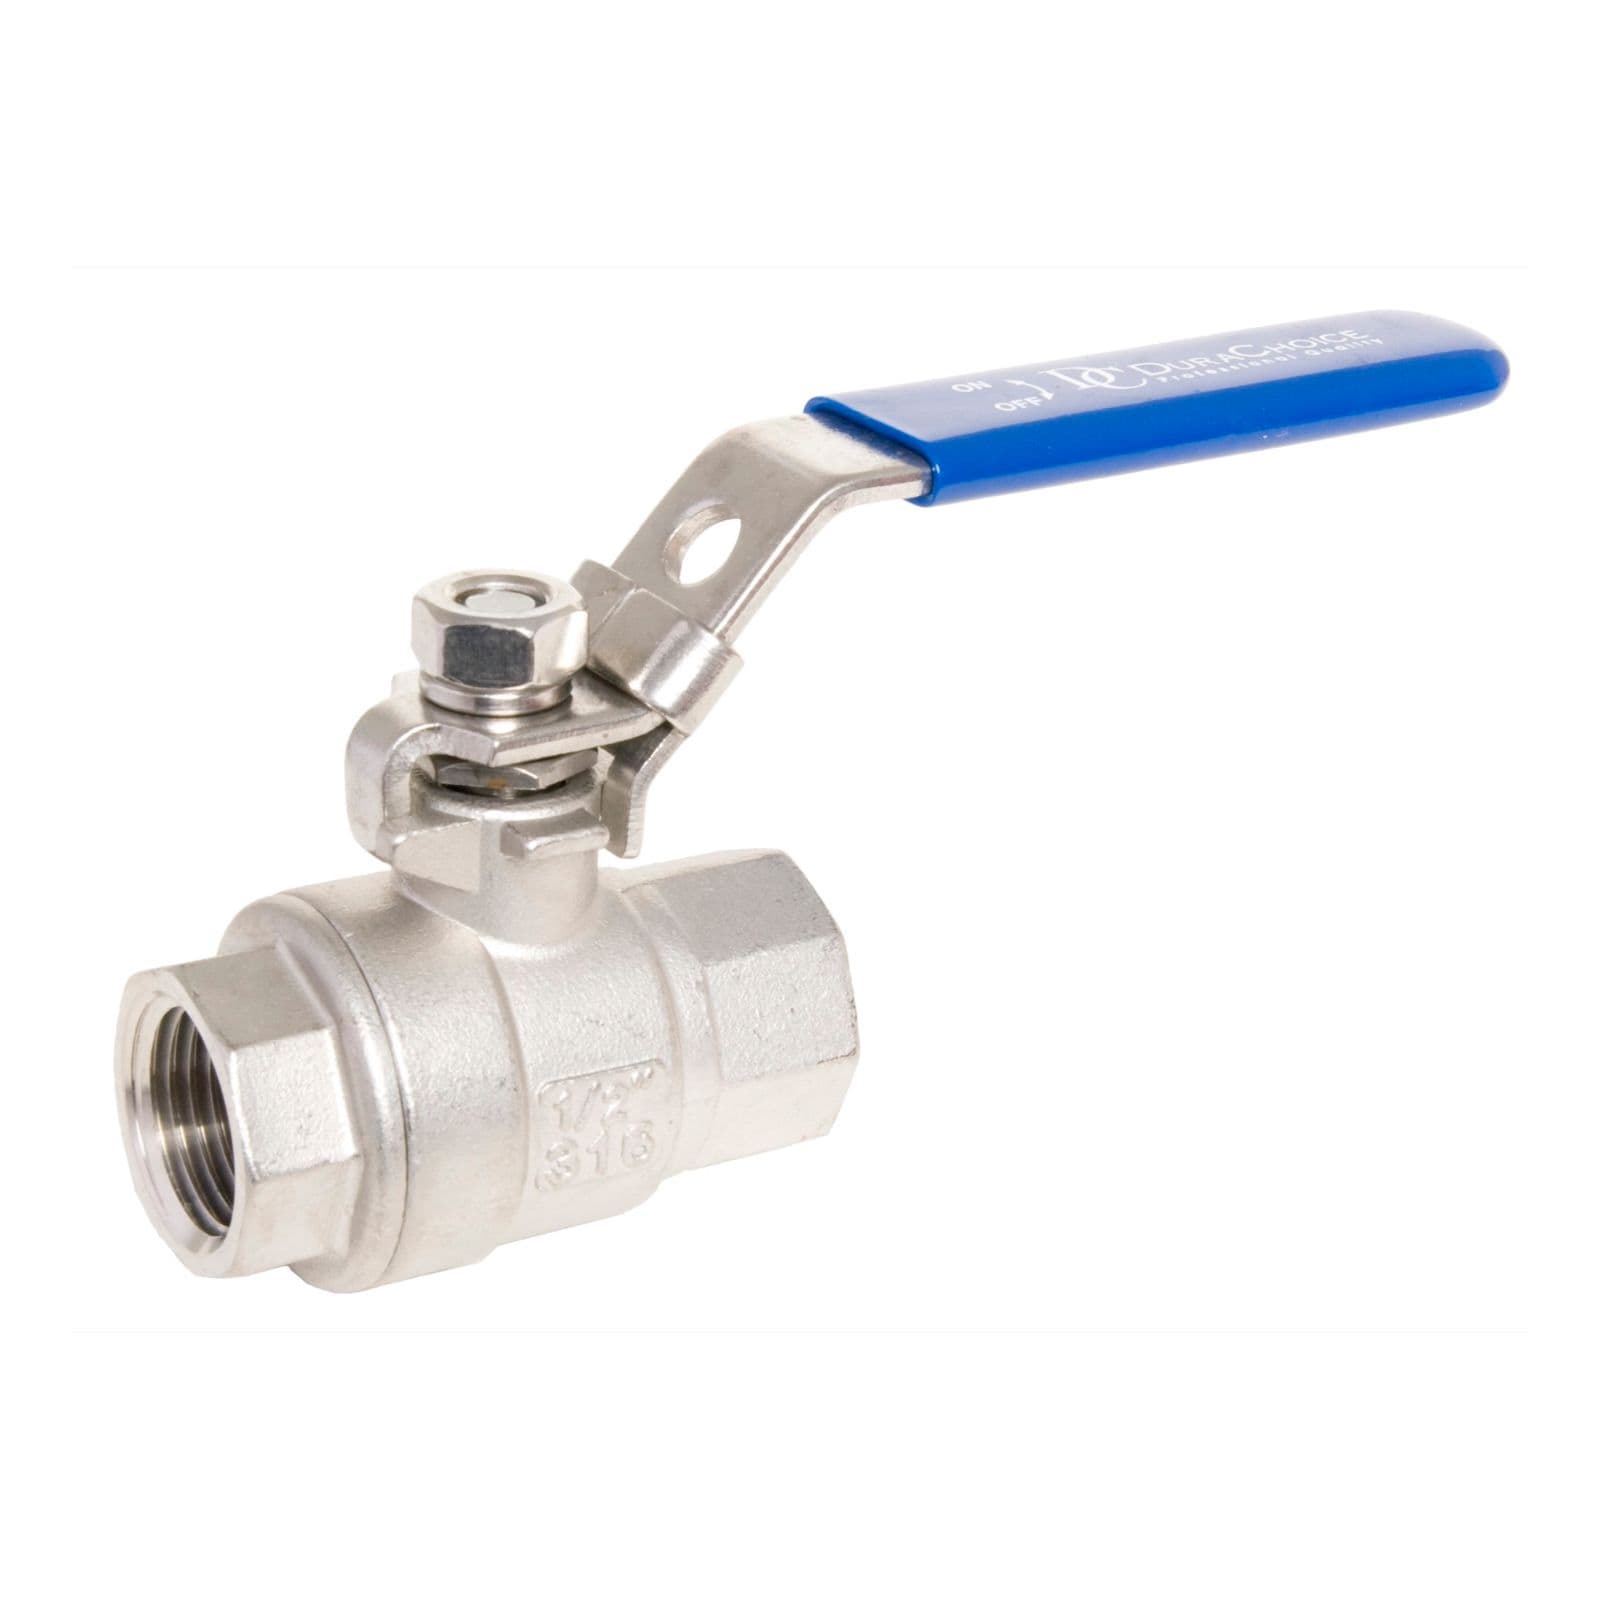 Wrewing 304 Stainless Steel Ball Valve 1000WOG for Water Gas Oil 1/2” Two-piece Ball Valve Homebrew Hardware 